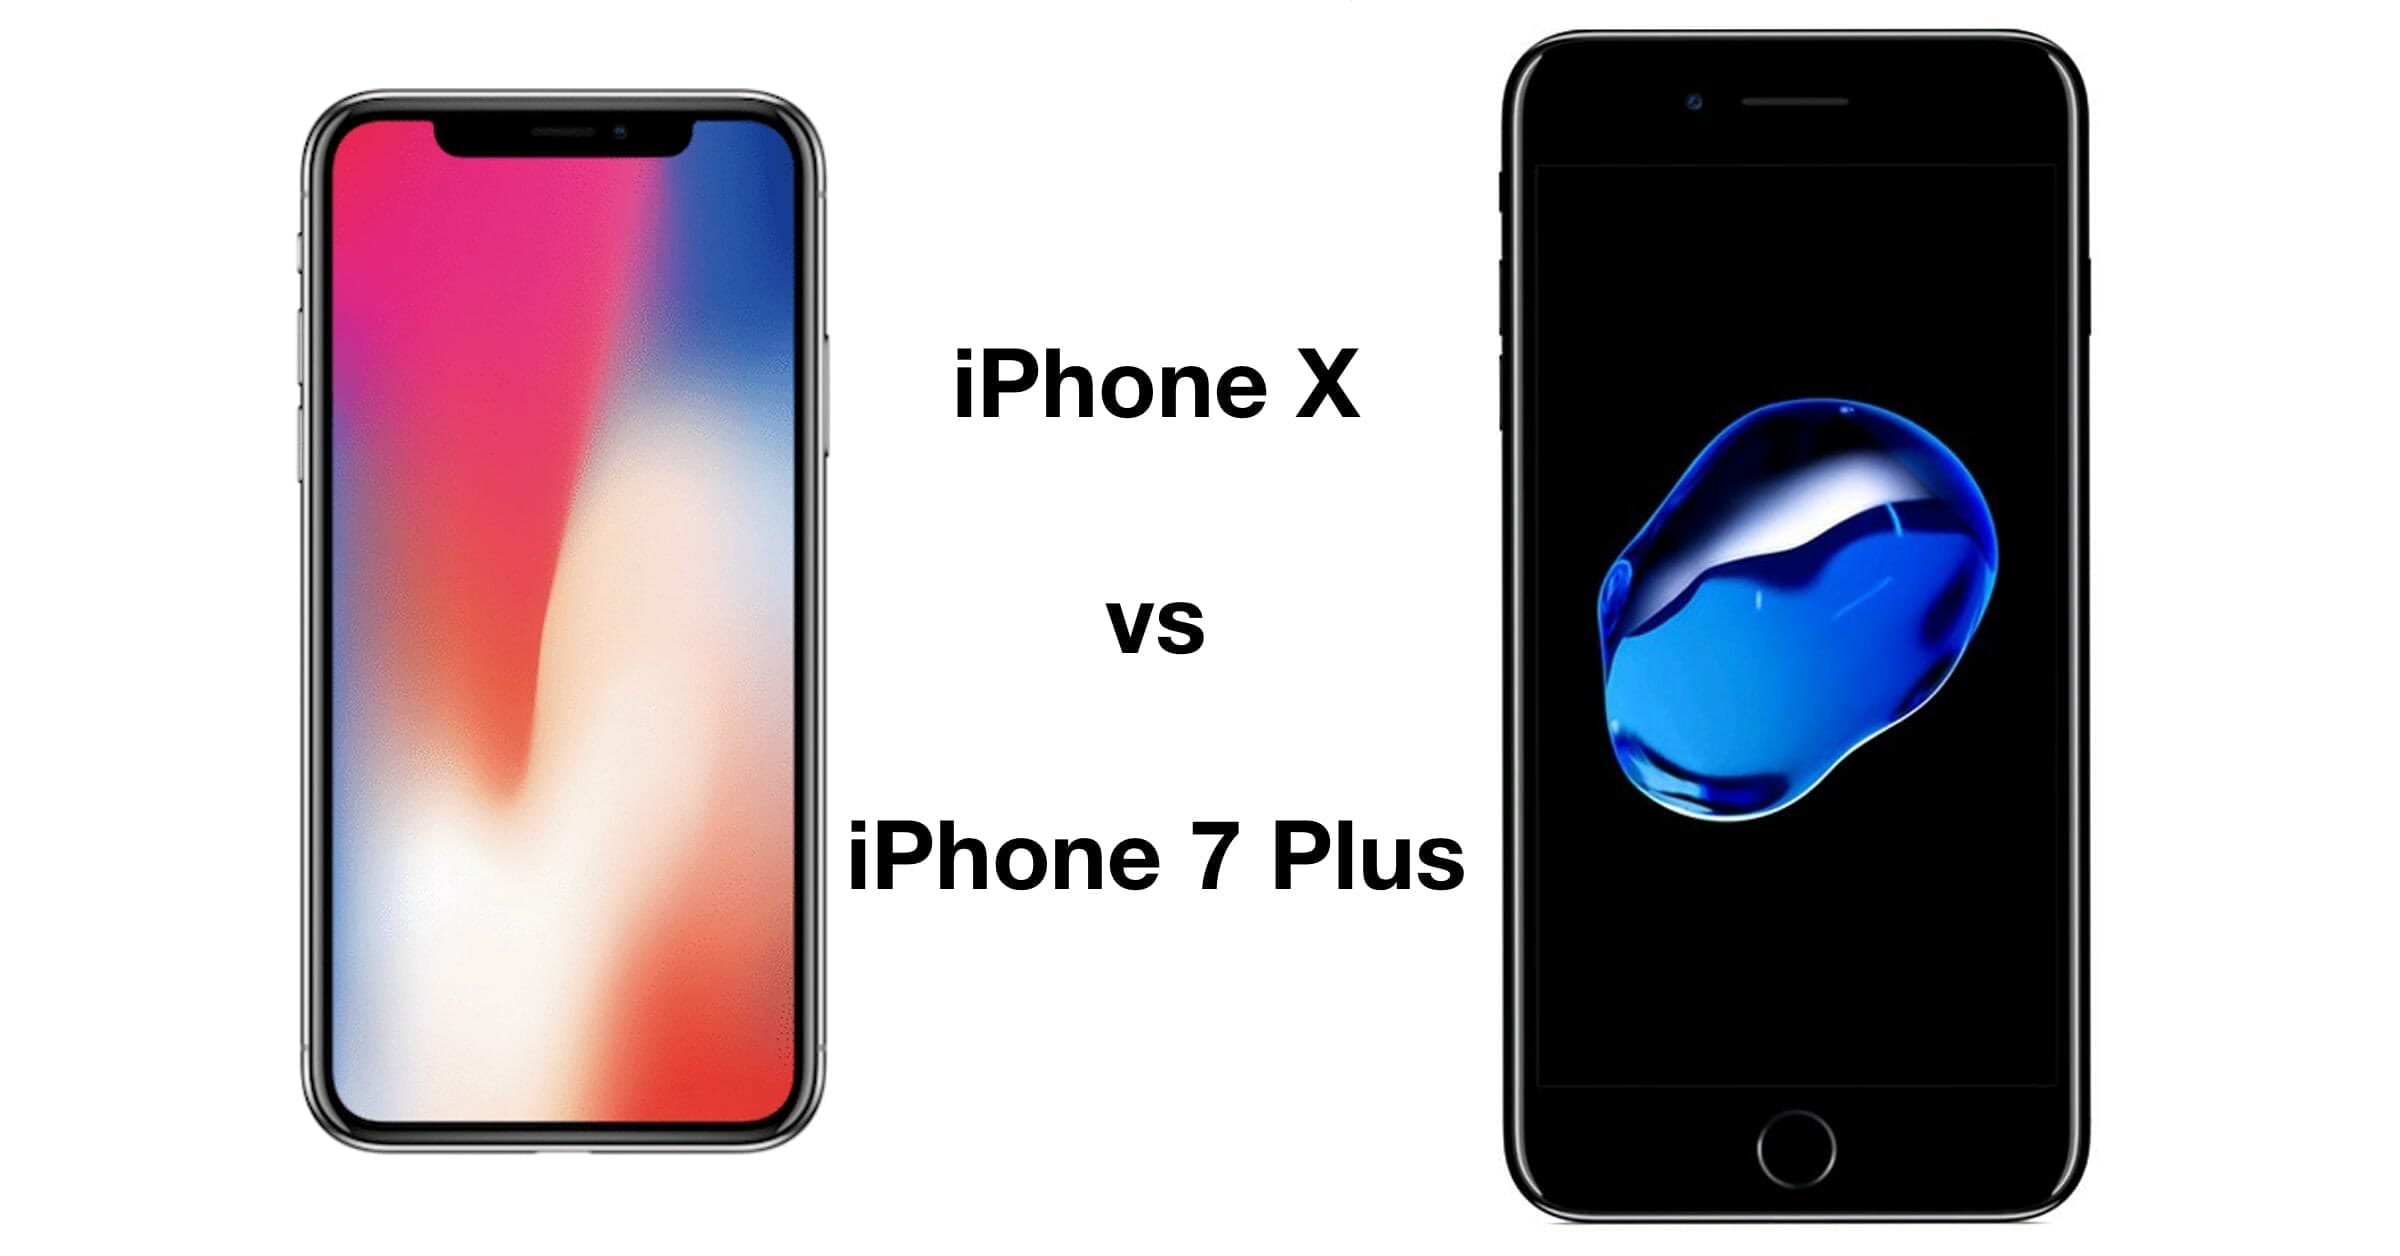 In-Depth Review And Comparison Of The IPhone X Vs. IPhone 7 Plus